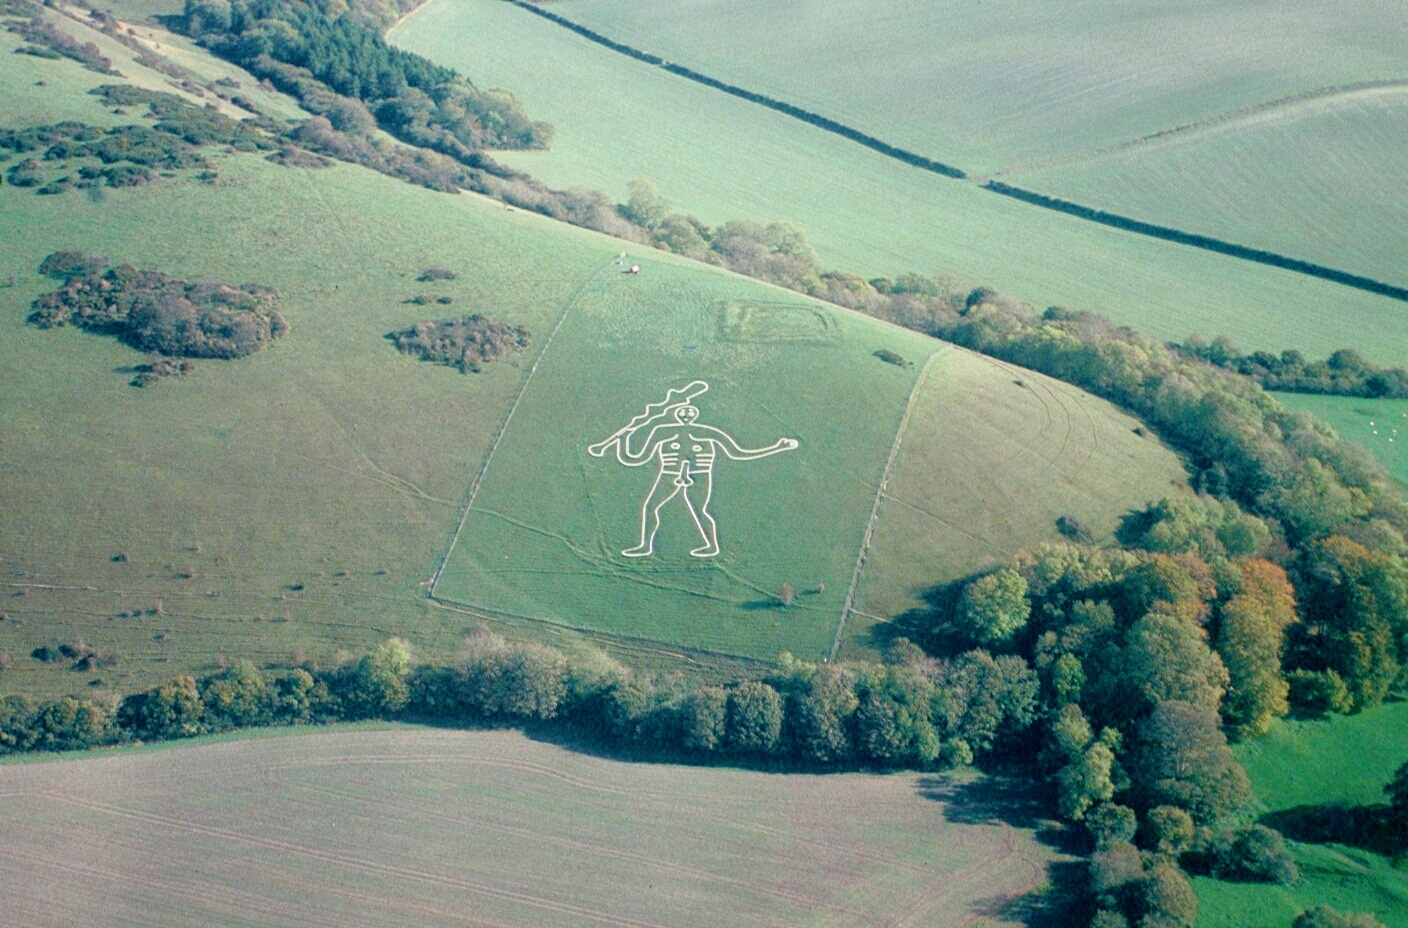 The hillside just north of Cerne Abbey features a rectangle of much greener grass than the surrounding area, with a large outline of a giant carved into the chalk of the hill. The large giant dominated the hill, extending a massive club over its head. The figure has prominent abs and an erect phallus in its center.